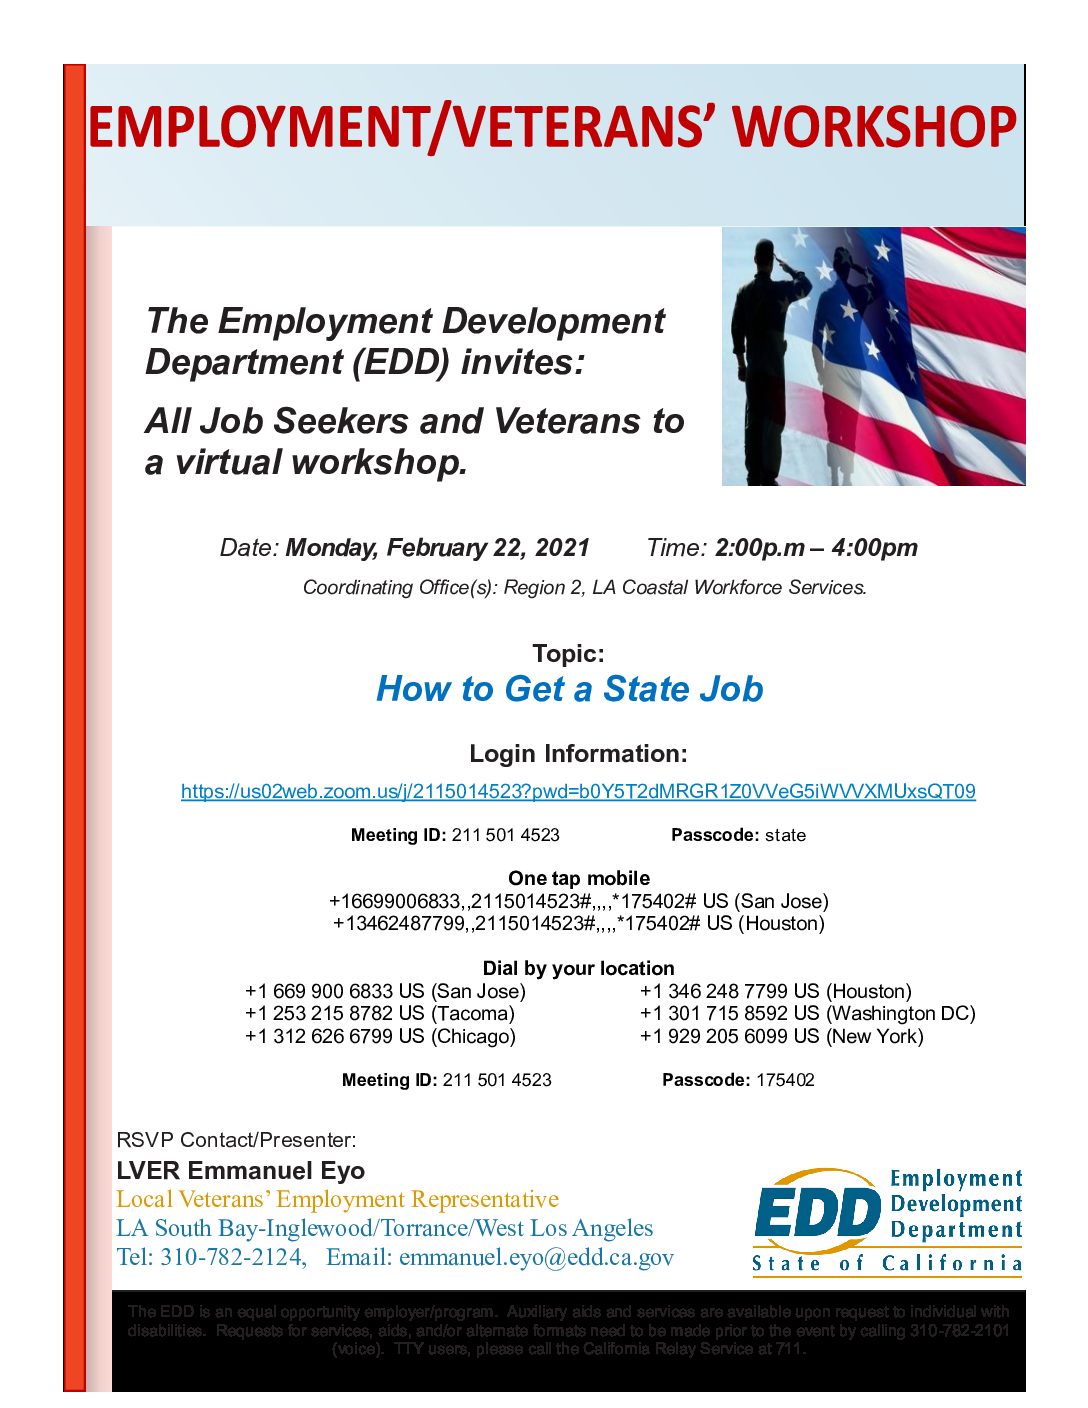 How to Get A State Job Workshop Flyer – Feb 22 2021